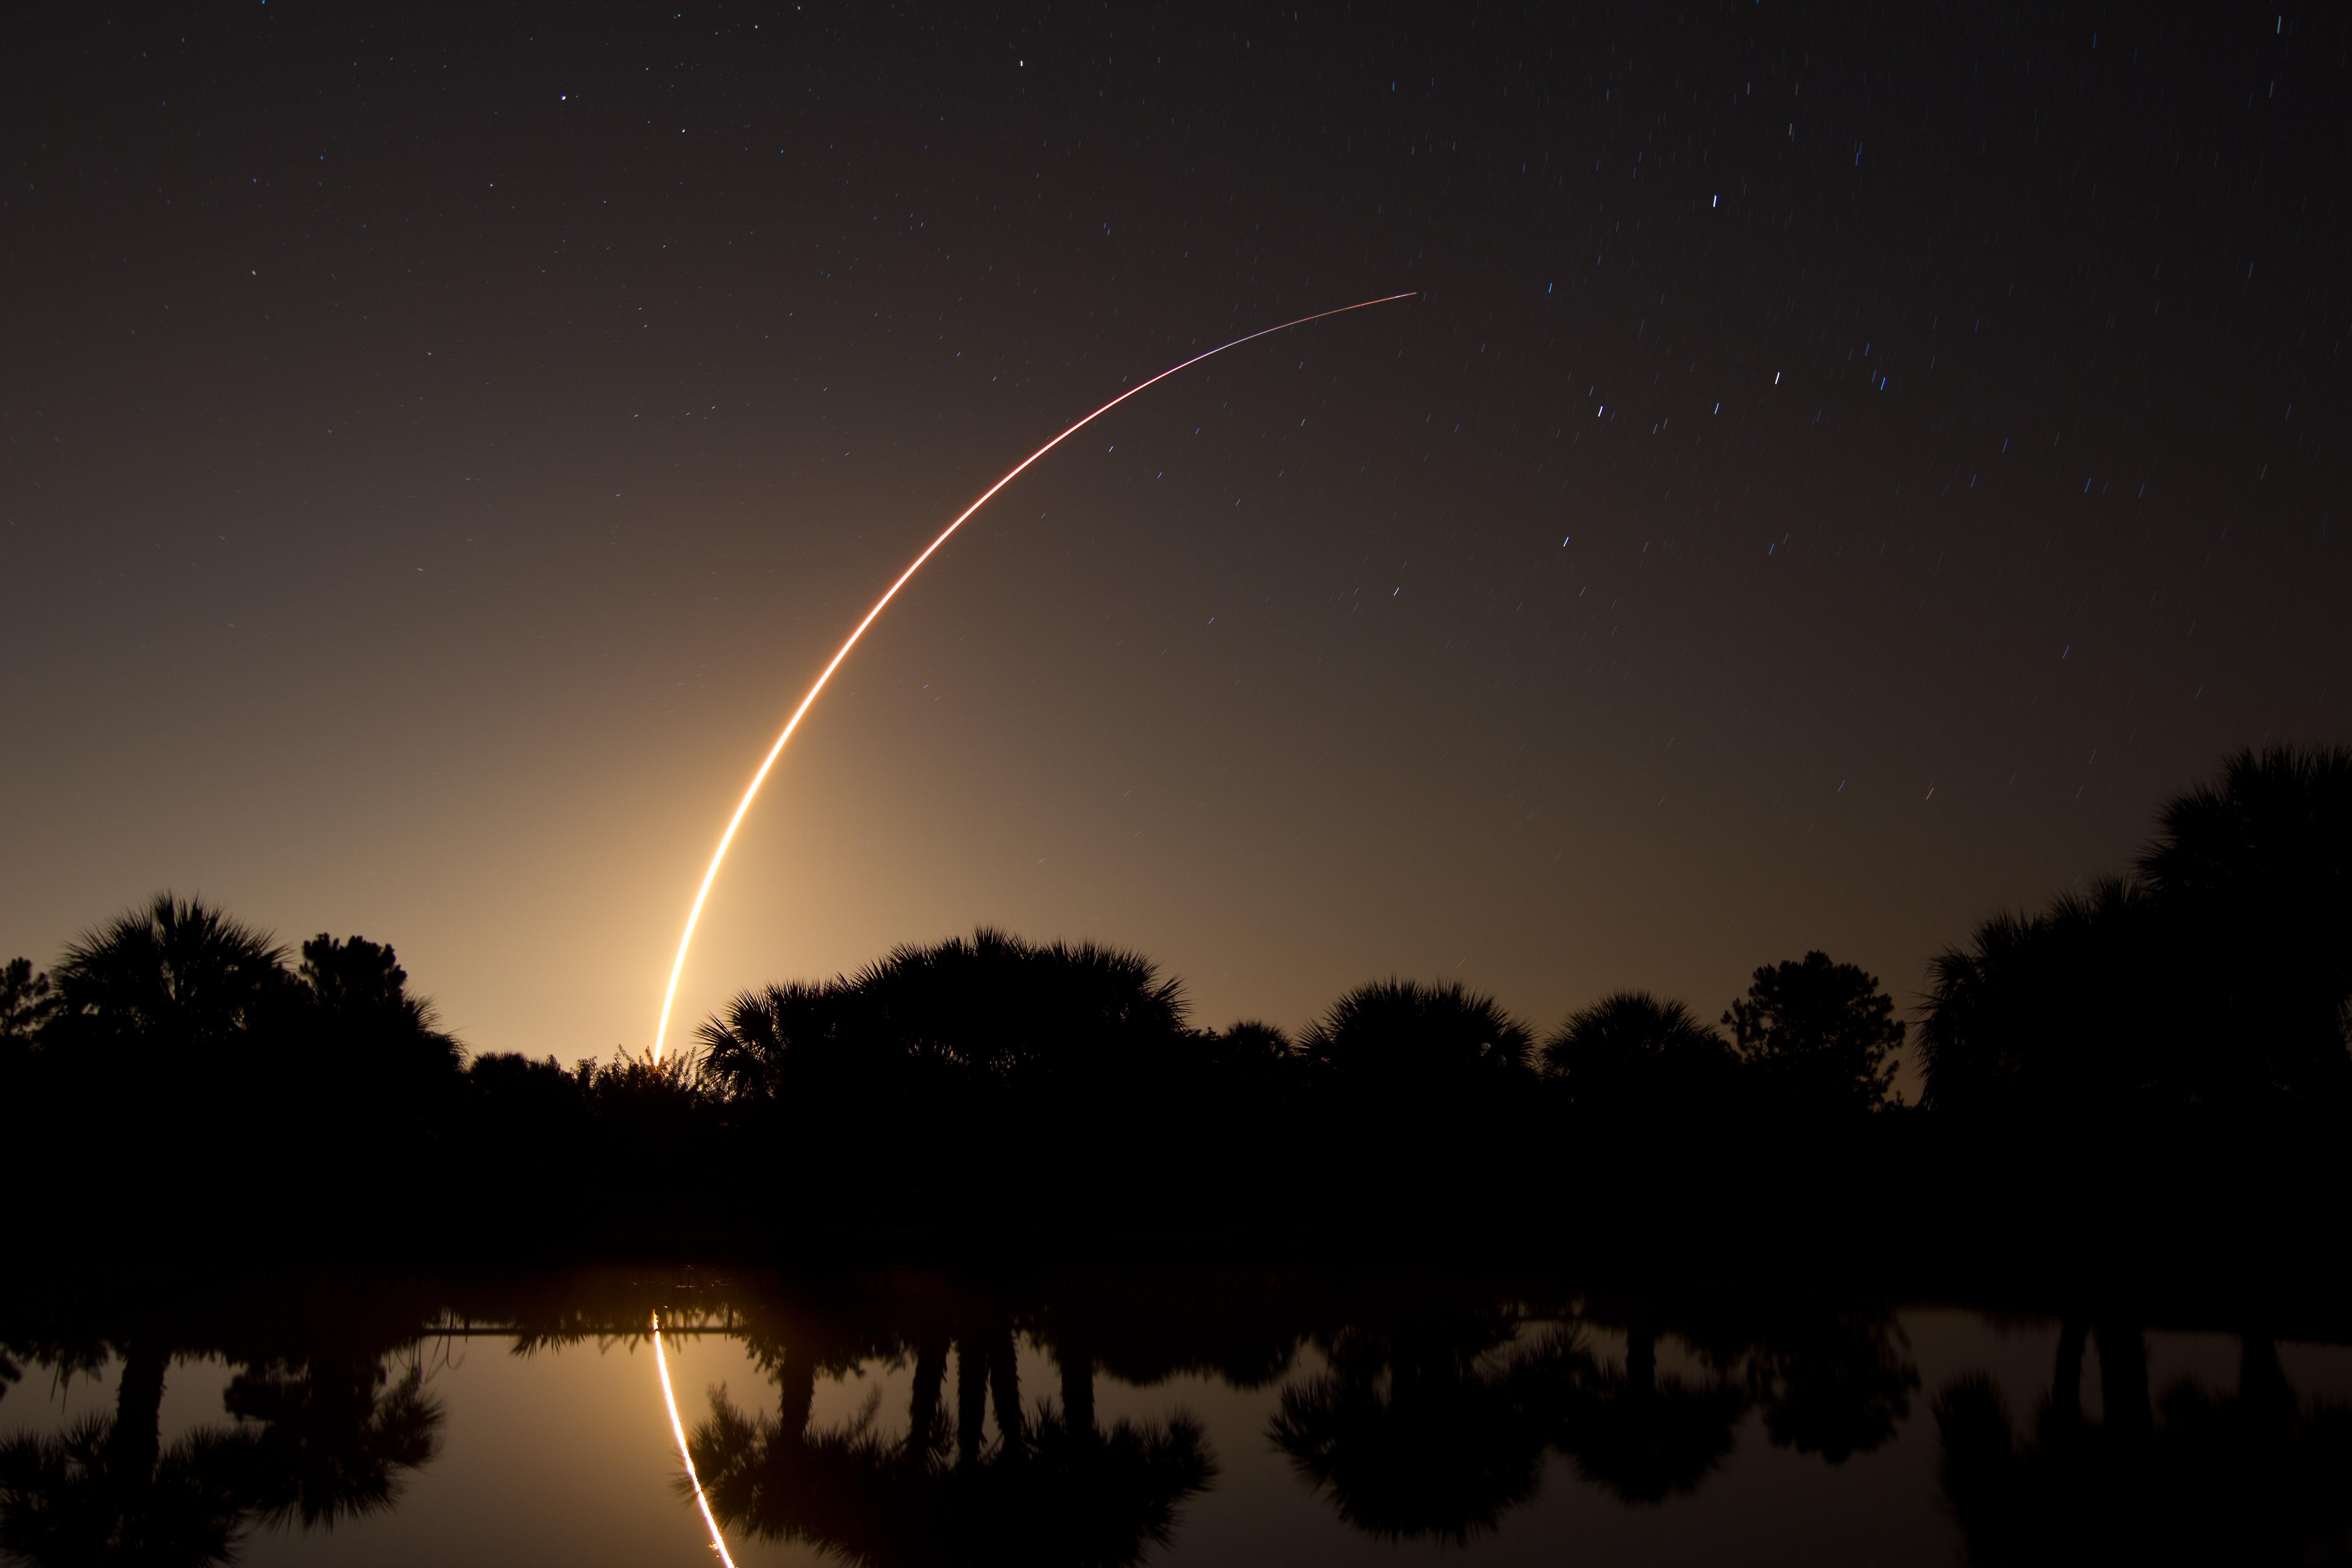 SpaceX Falcon 9 Rocket Launch on May 2012